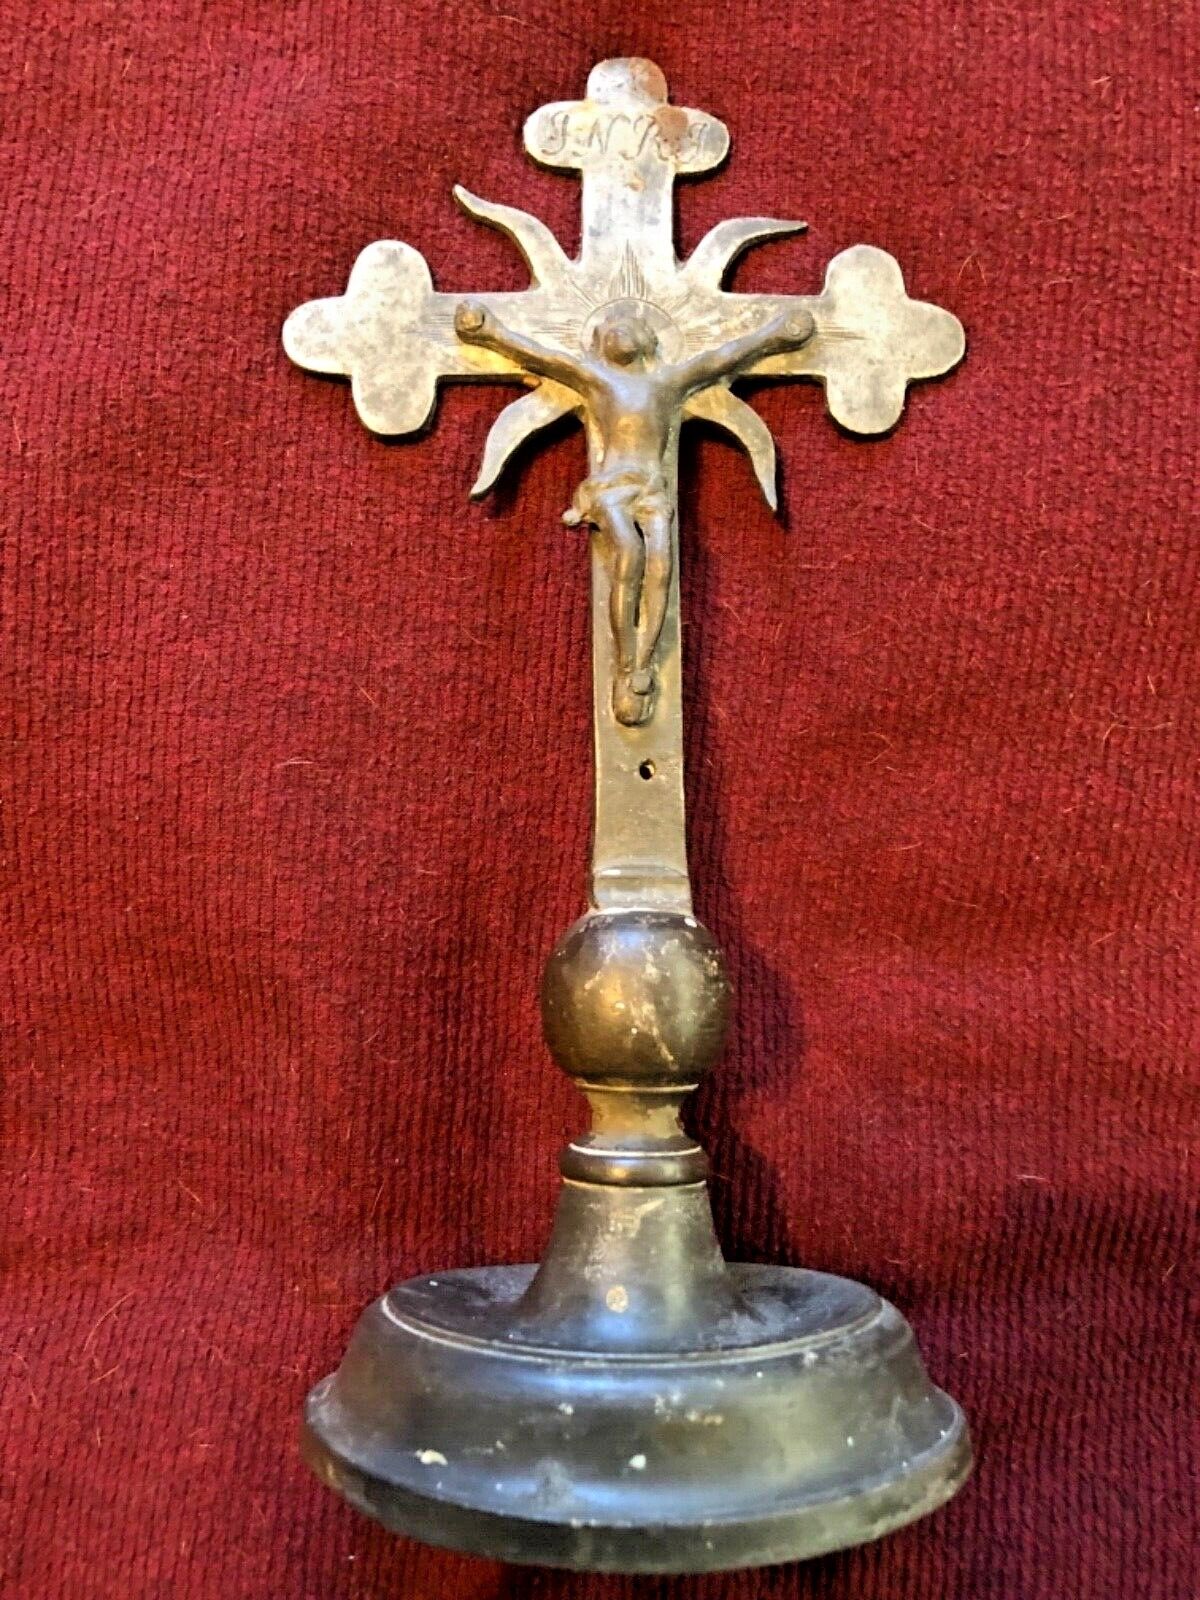 AMAZING LATE RENAISSANCE PEWTER CRUCIFIX FROM FRANCE CA. 1640 17TH CENTURY